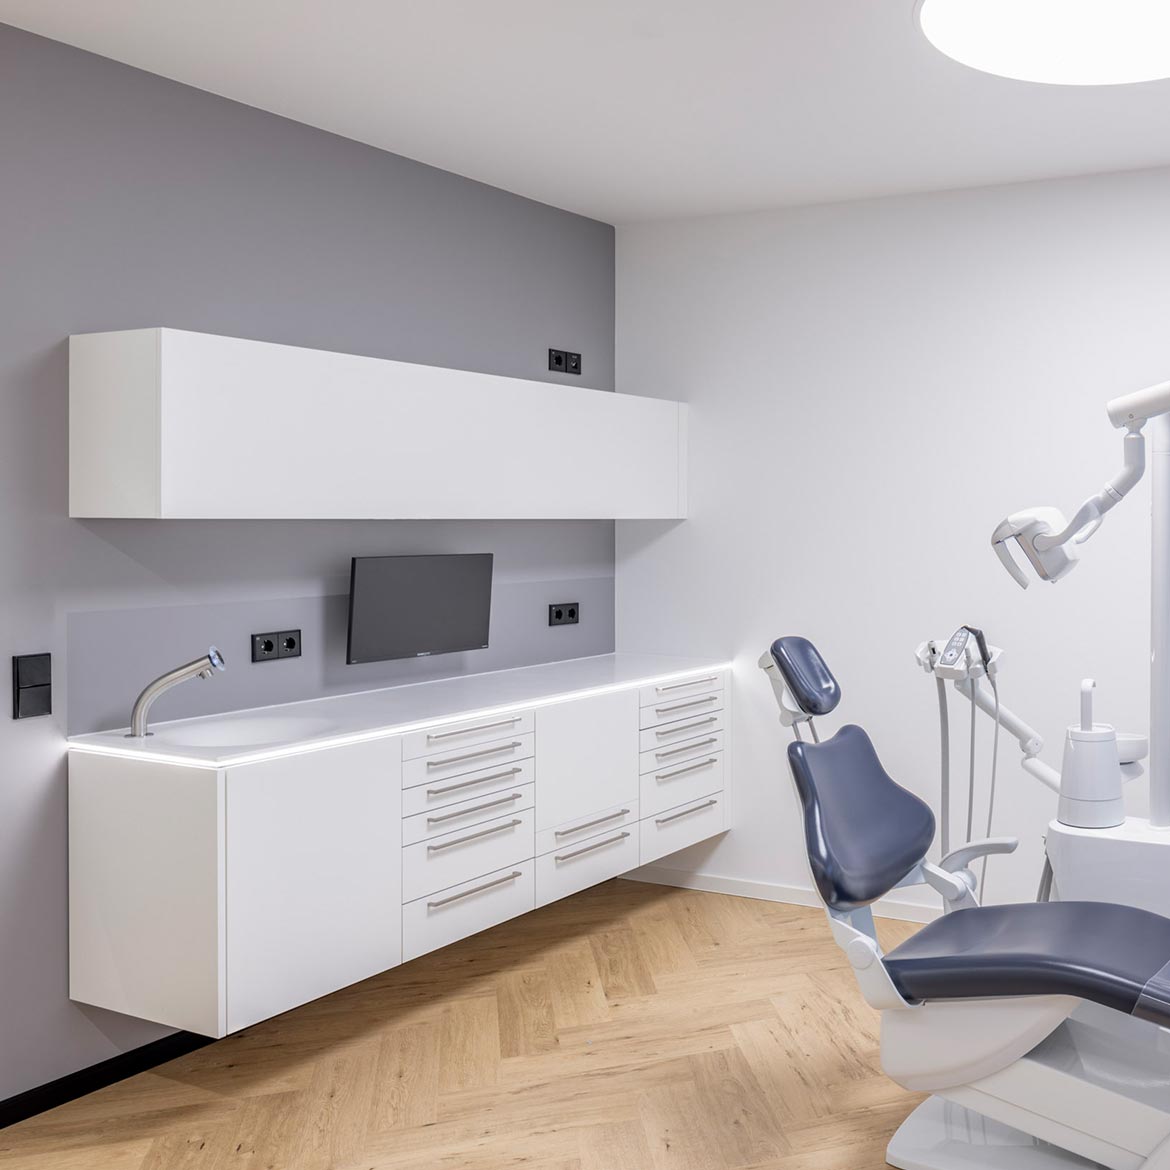 Medical & Dental – Furnishings and interior design for practices